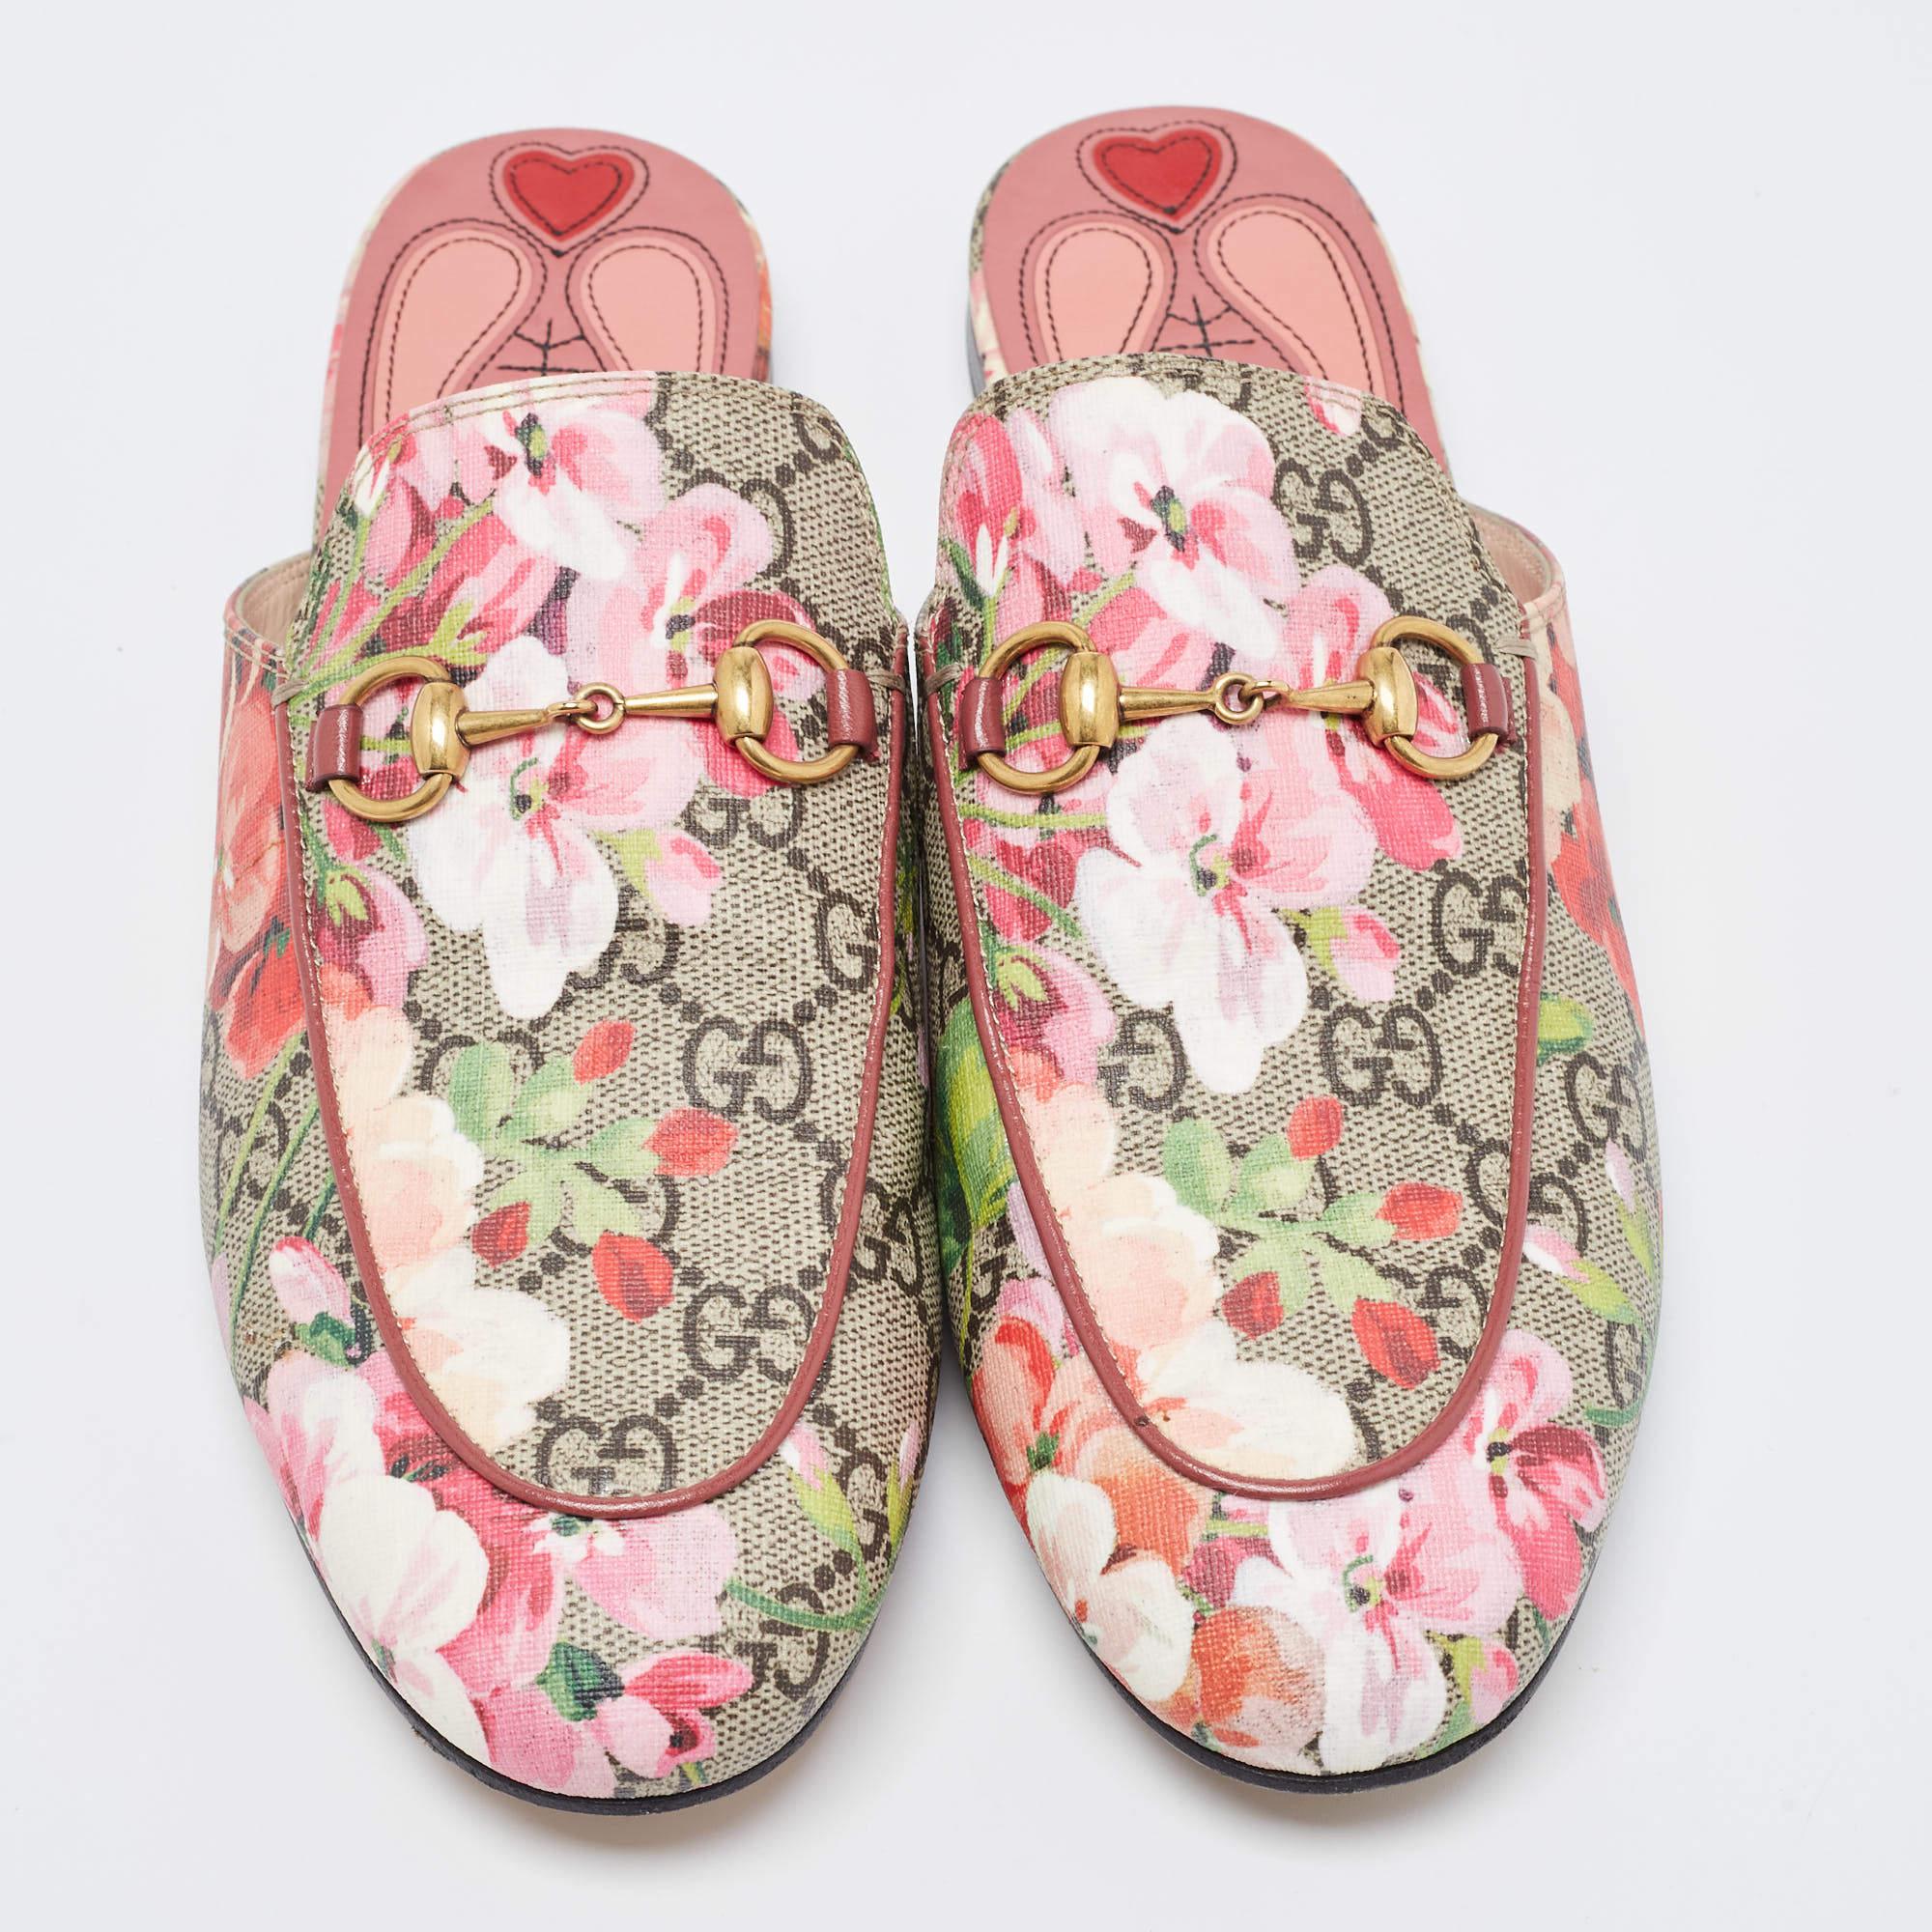 These Gucci Princetown mules signify luxury and practicality. An ultimate favorite of style enthusiasts, the silhouette of this pair gets a luxe update with the Horsebit motif on the uppers. It comes made from floral coated canvas with striking